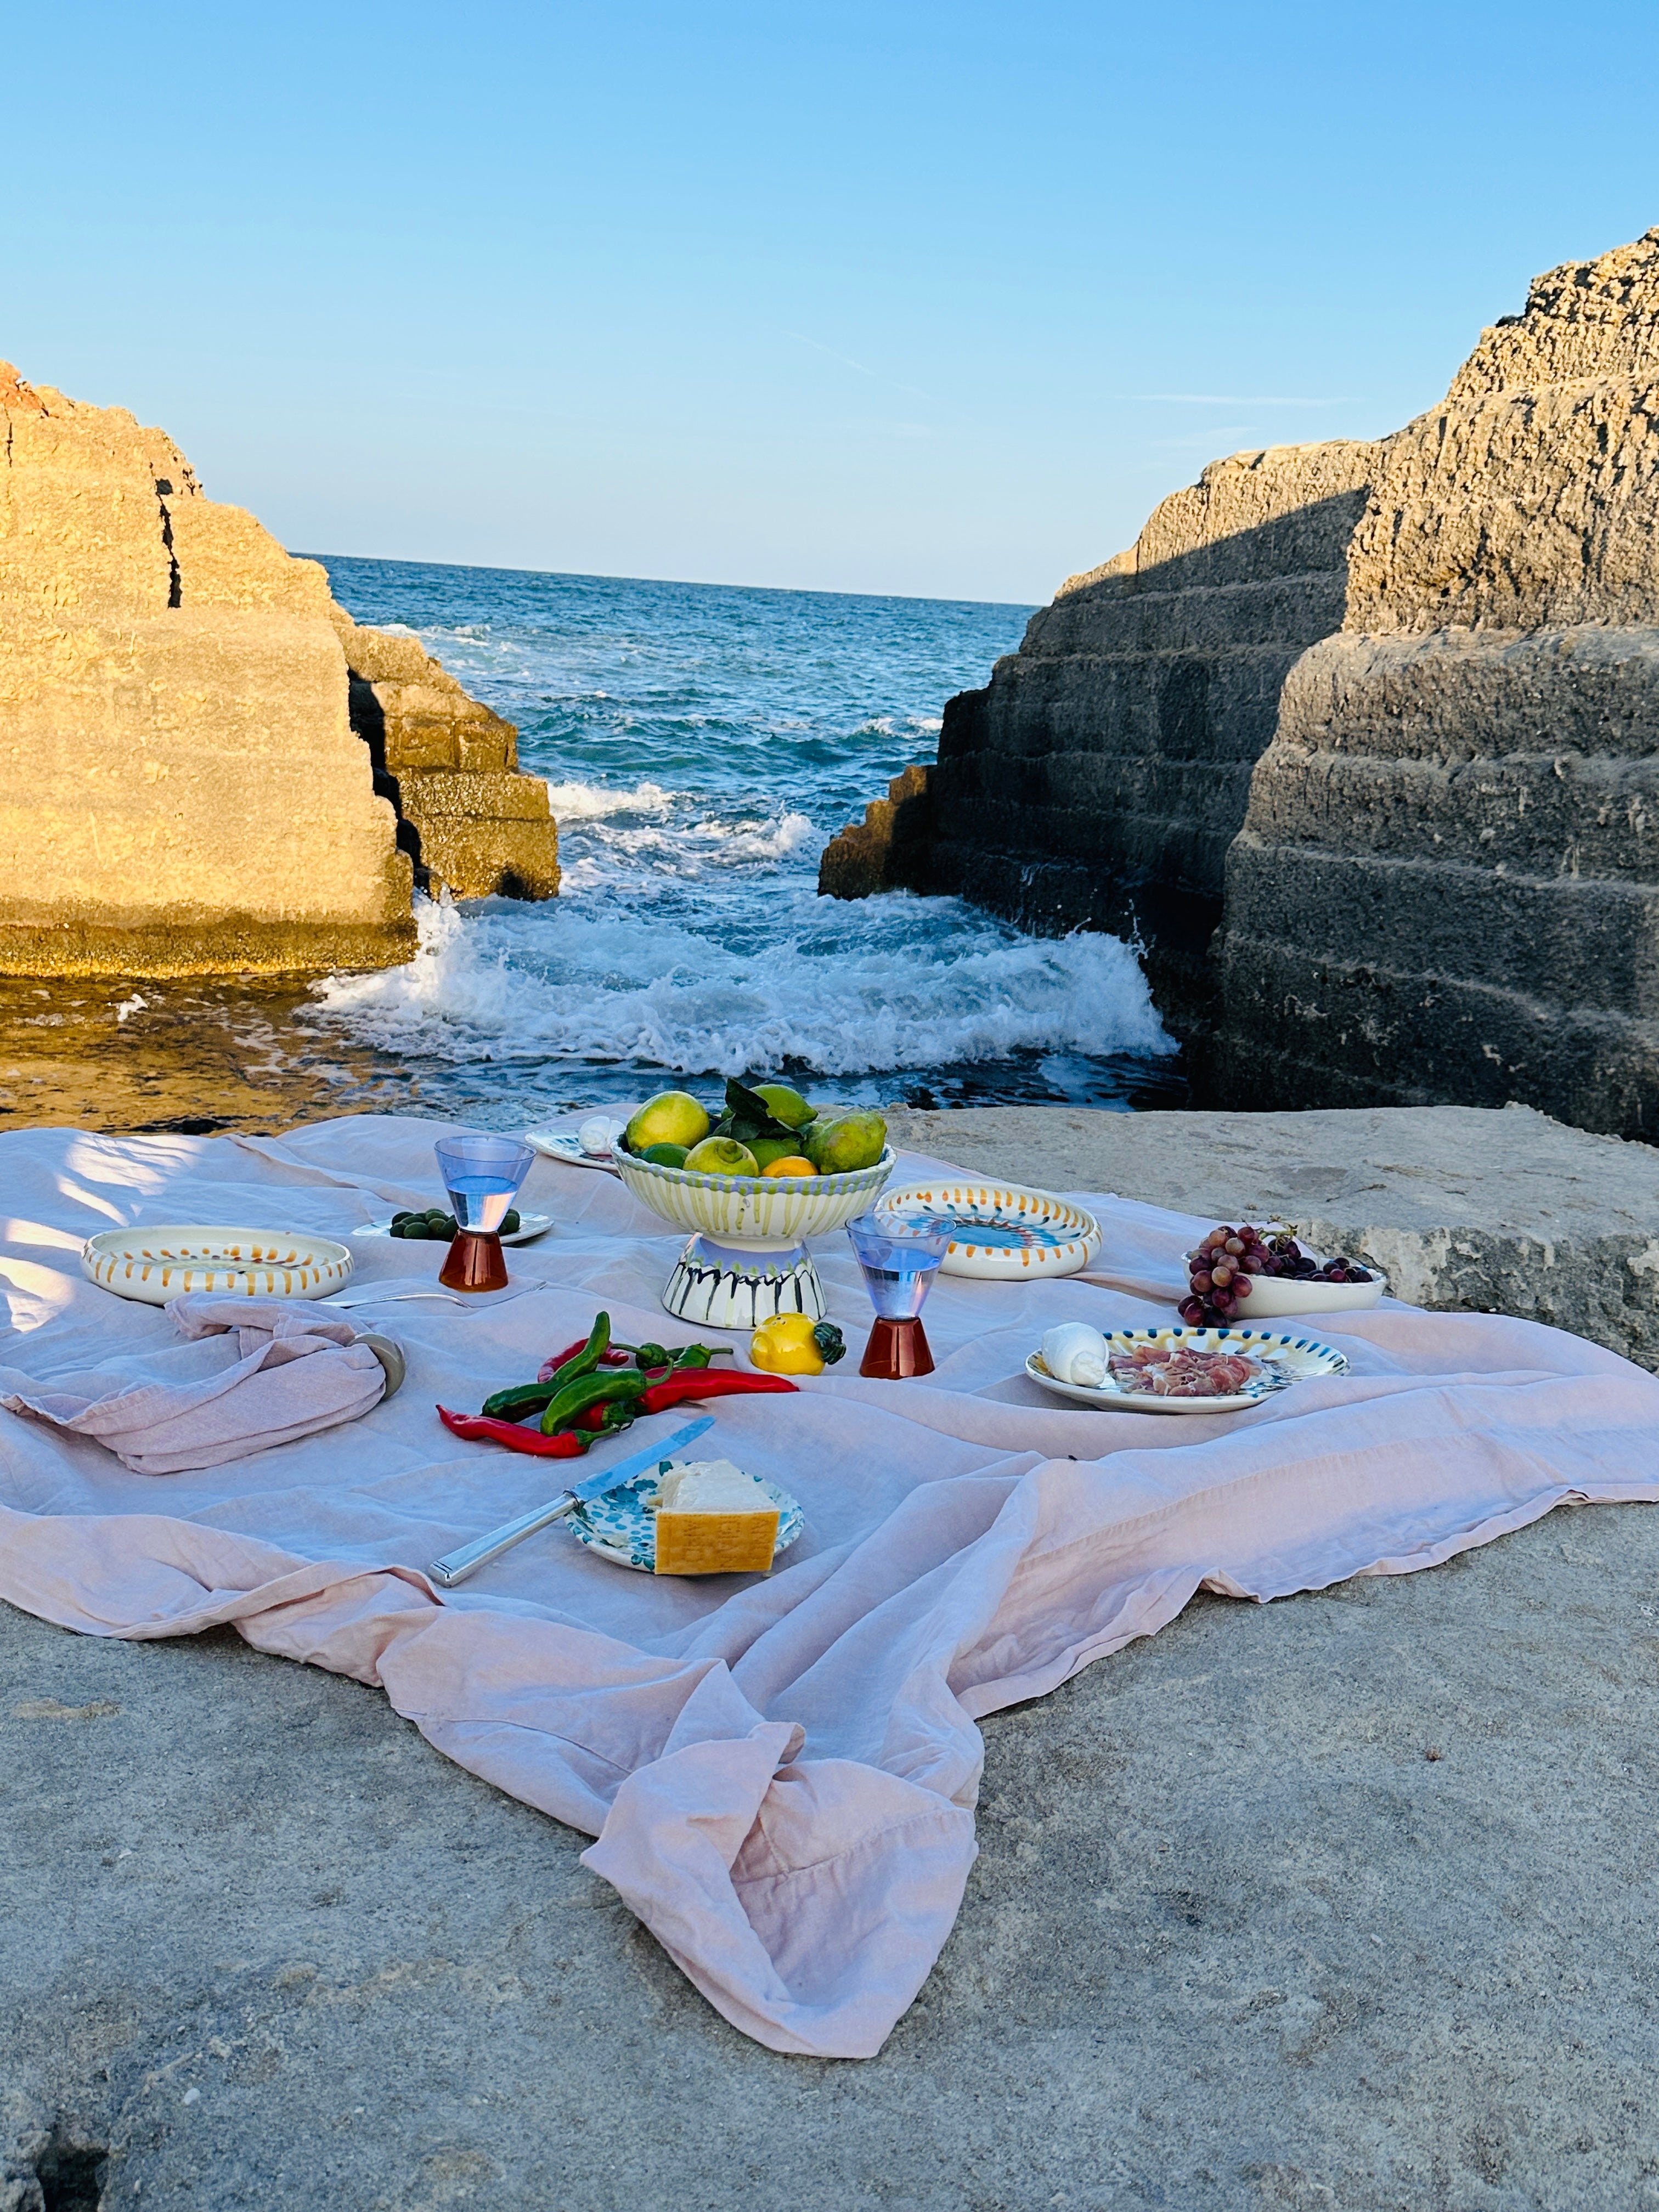 Top Secret Picnic Place spotted by the Riviera's